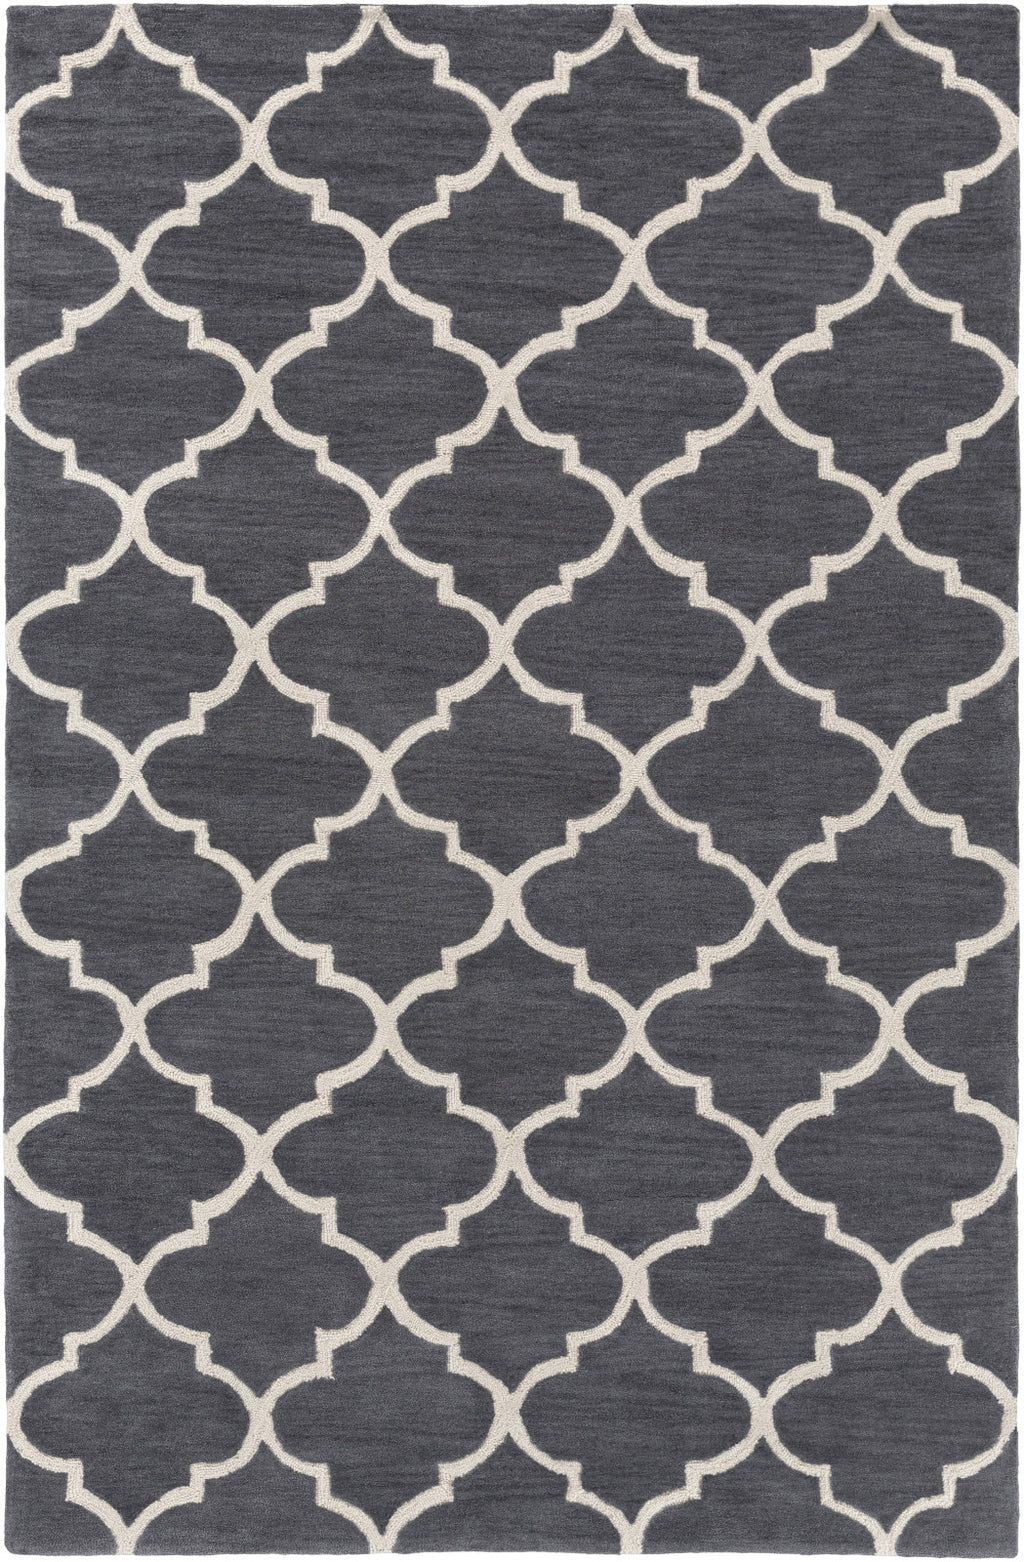 Artistic Weavers Holden Finley Charcoal/Ivory Area Rug main image